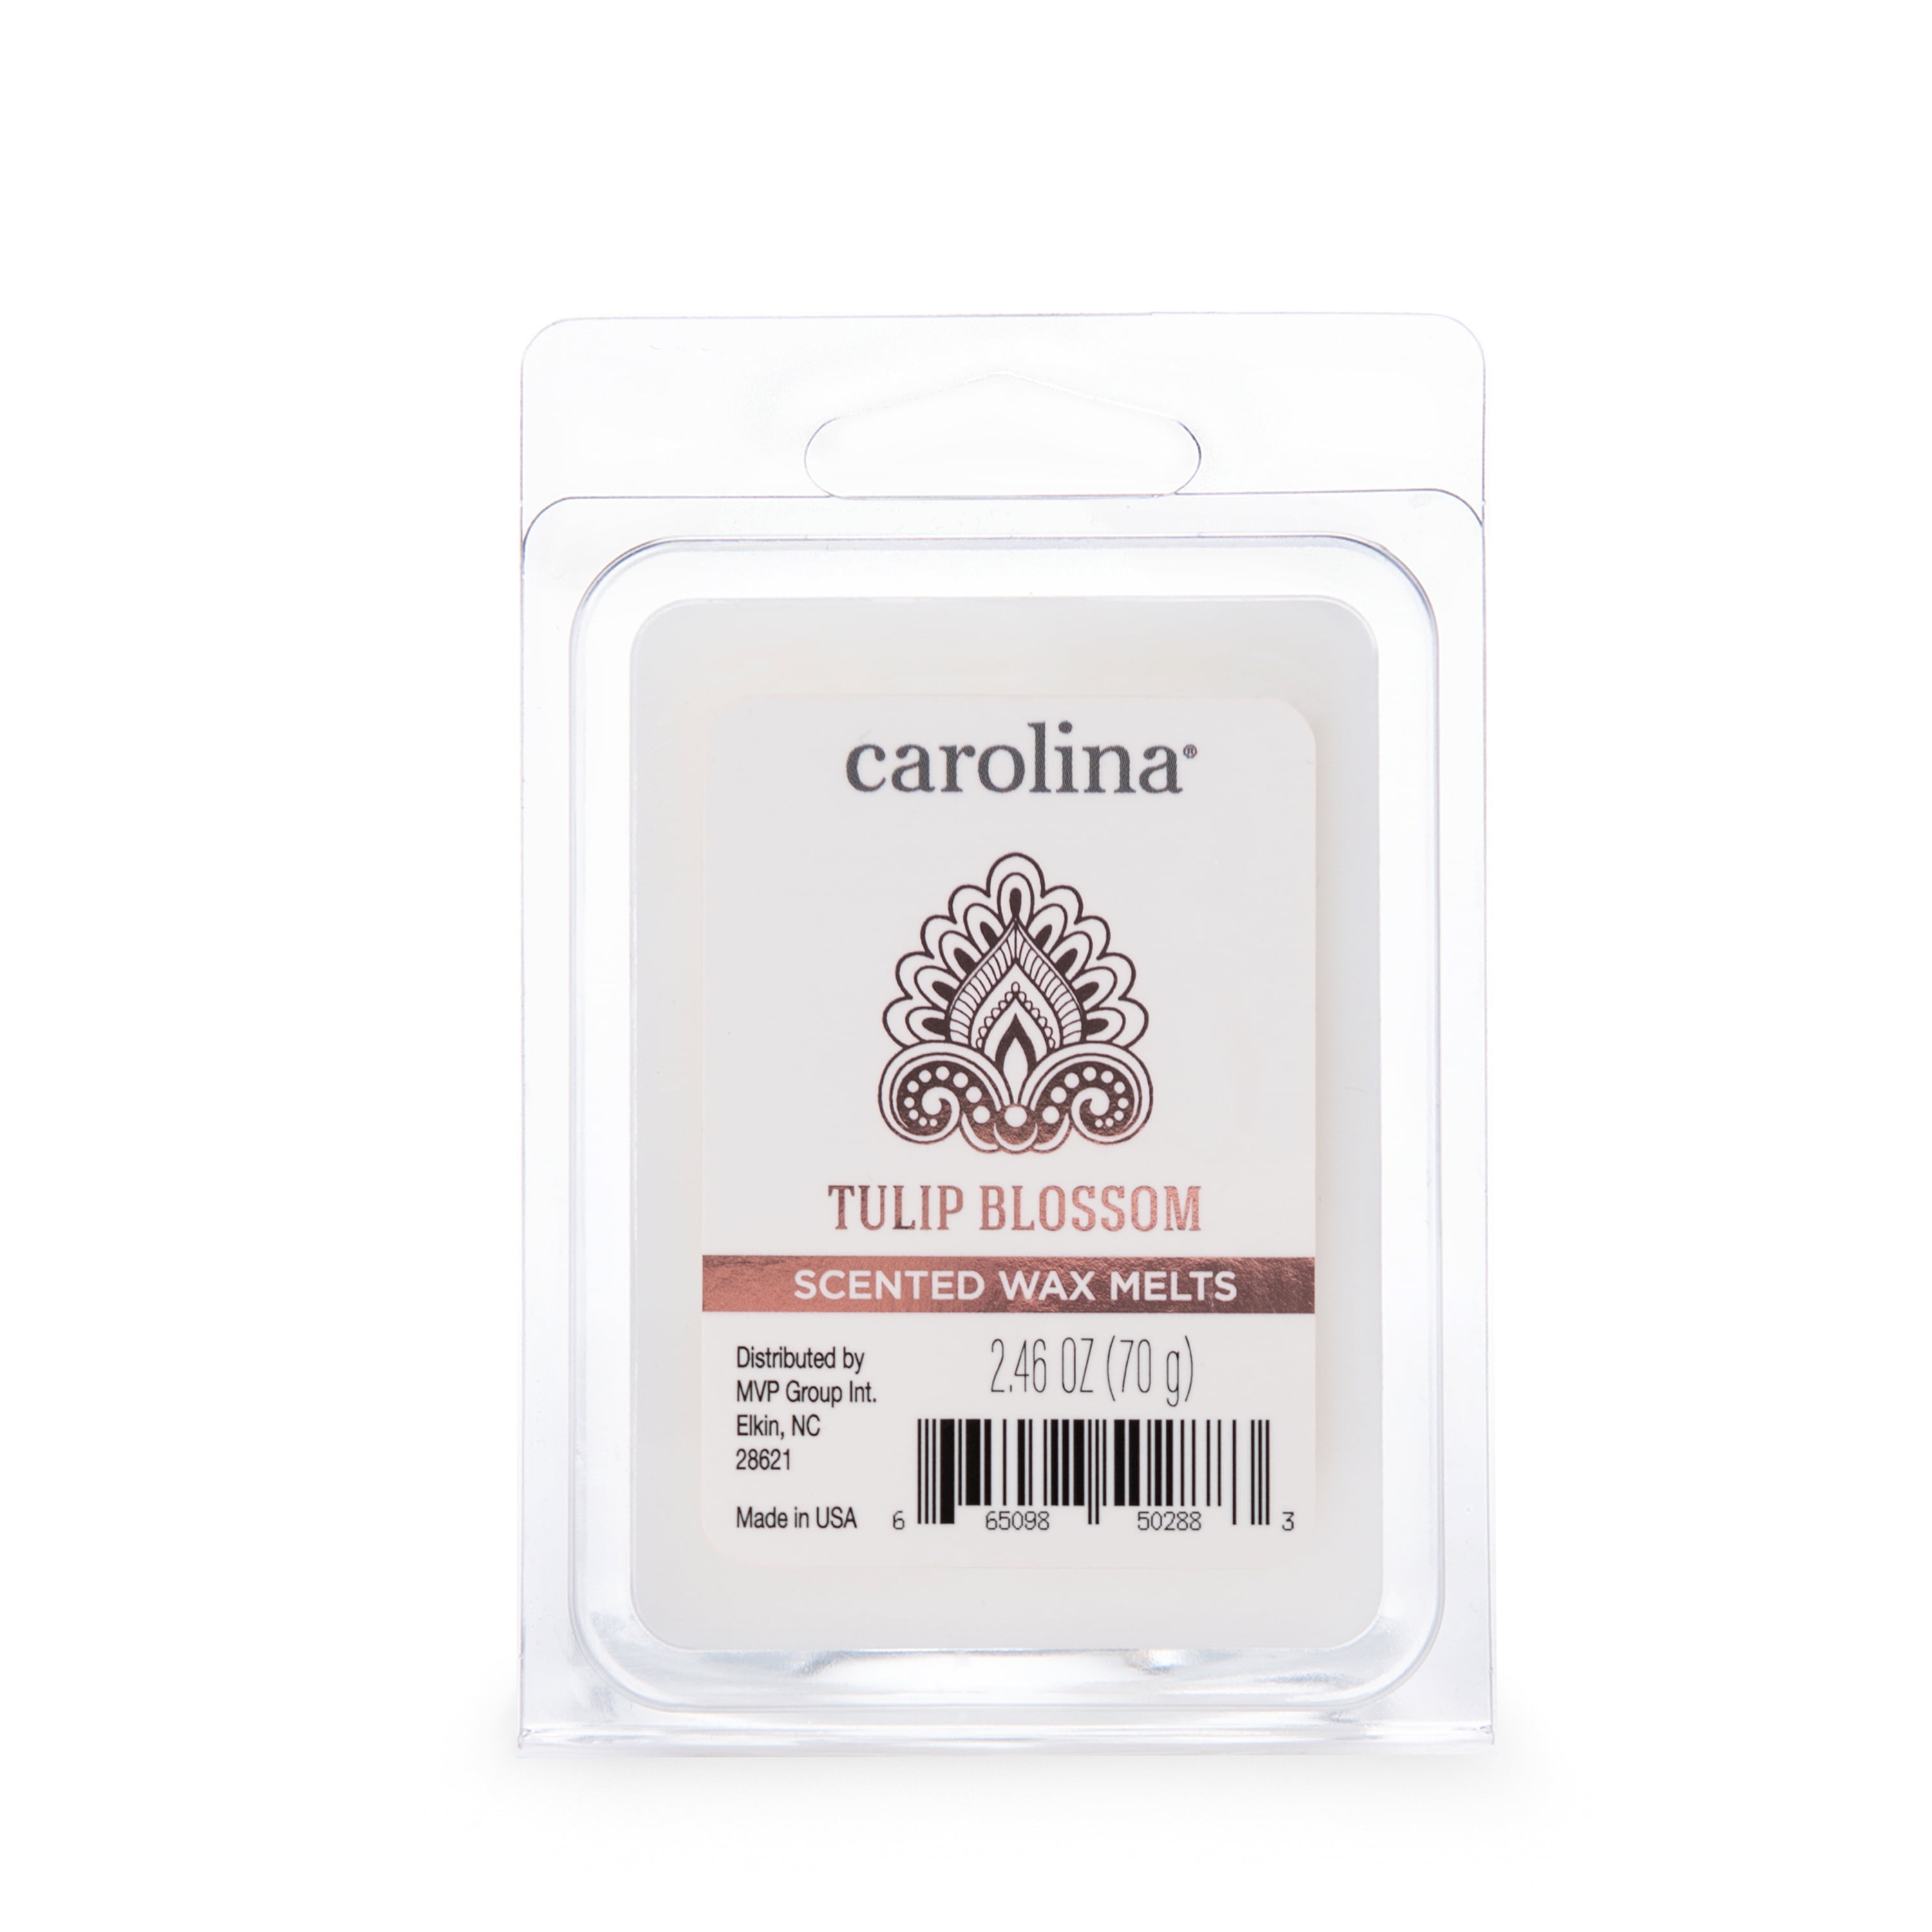 Carolina Candles Carolina Candle Tulip Blossom Scented Wax Melt, Aromatherapy Wax Cubes with Premium Soy Wax and High Fragrance, Wellness Collection, Floral Fragrance, 6 Cube, 2.46 oz - Up To 45 Hours Burn